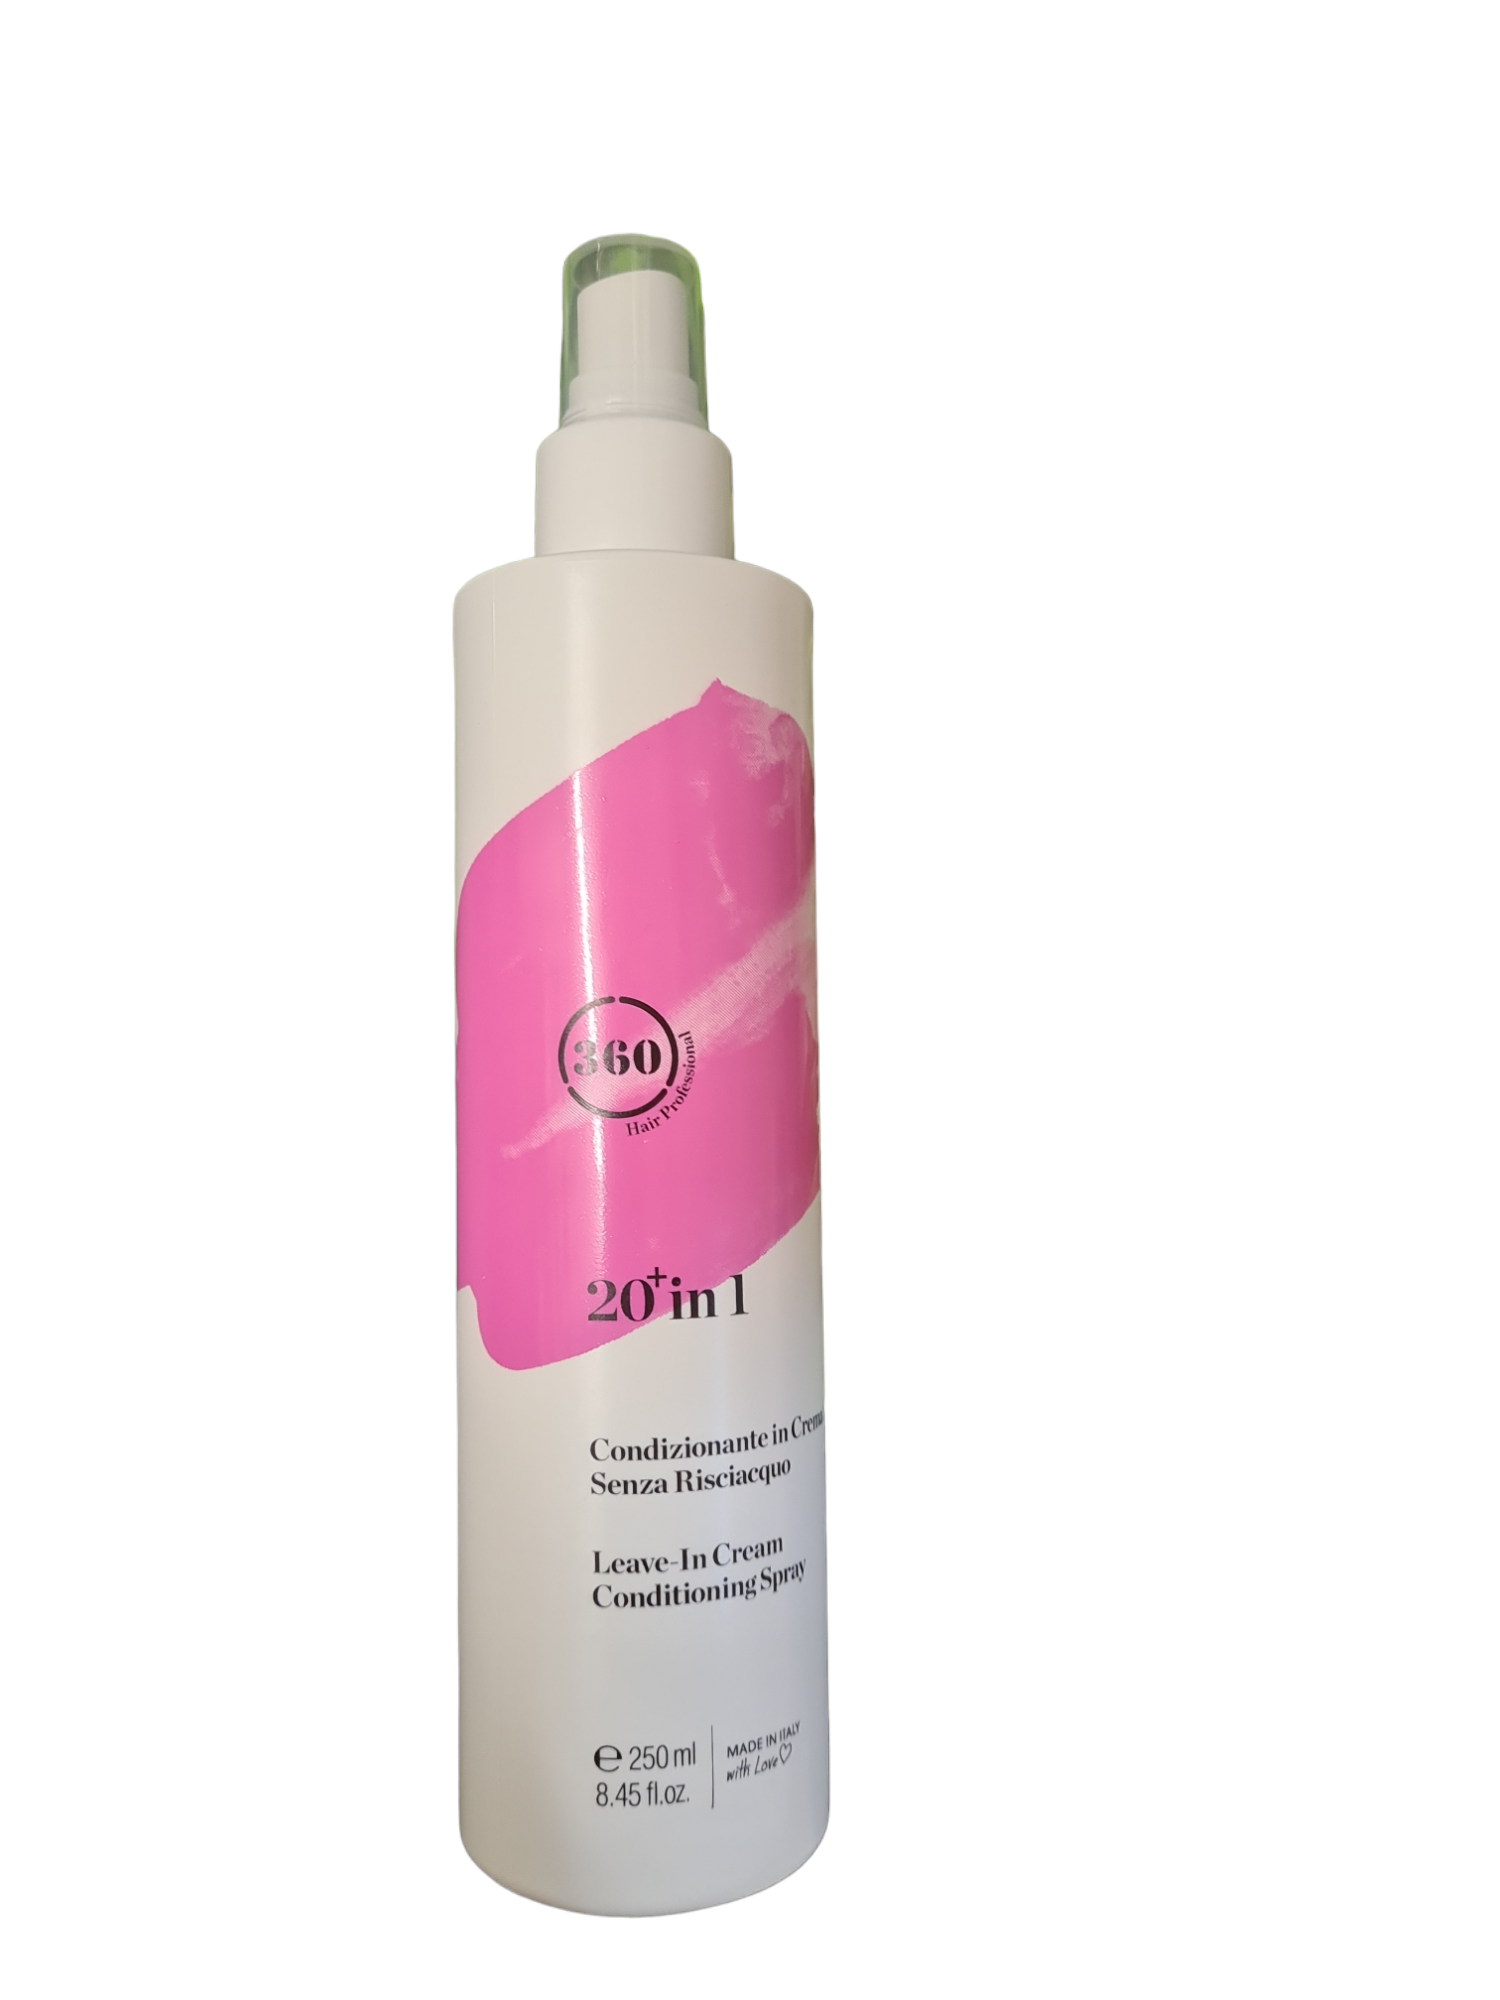 Kaaral 360 20 in 1 leave in creme conditionerende spray 250ml